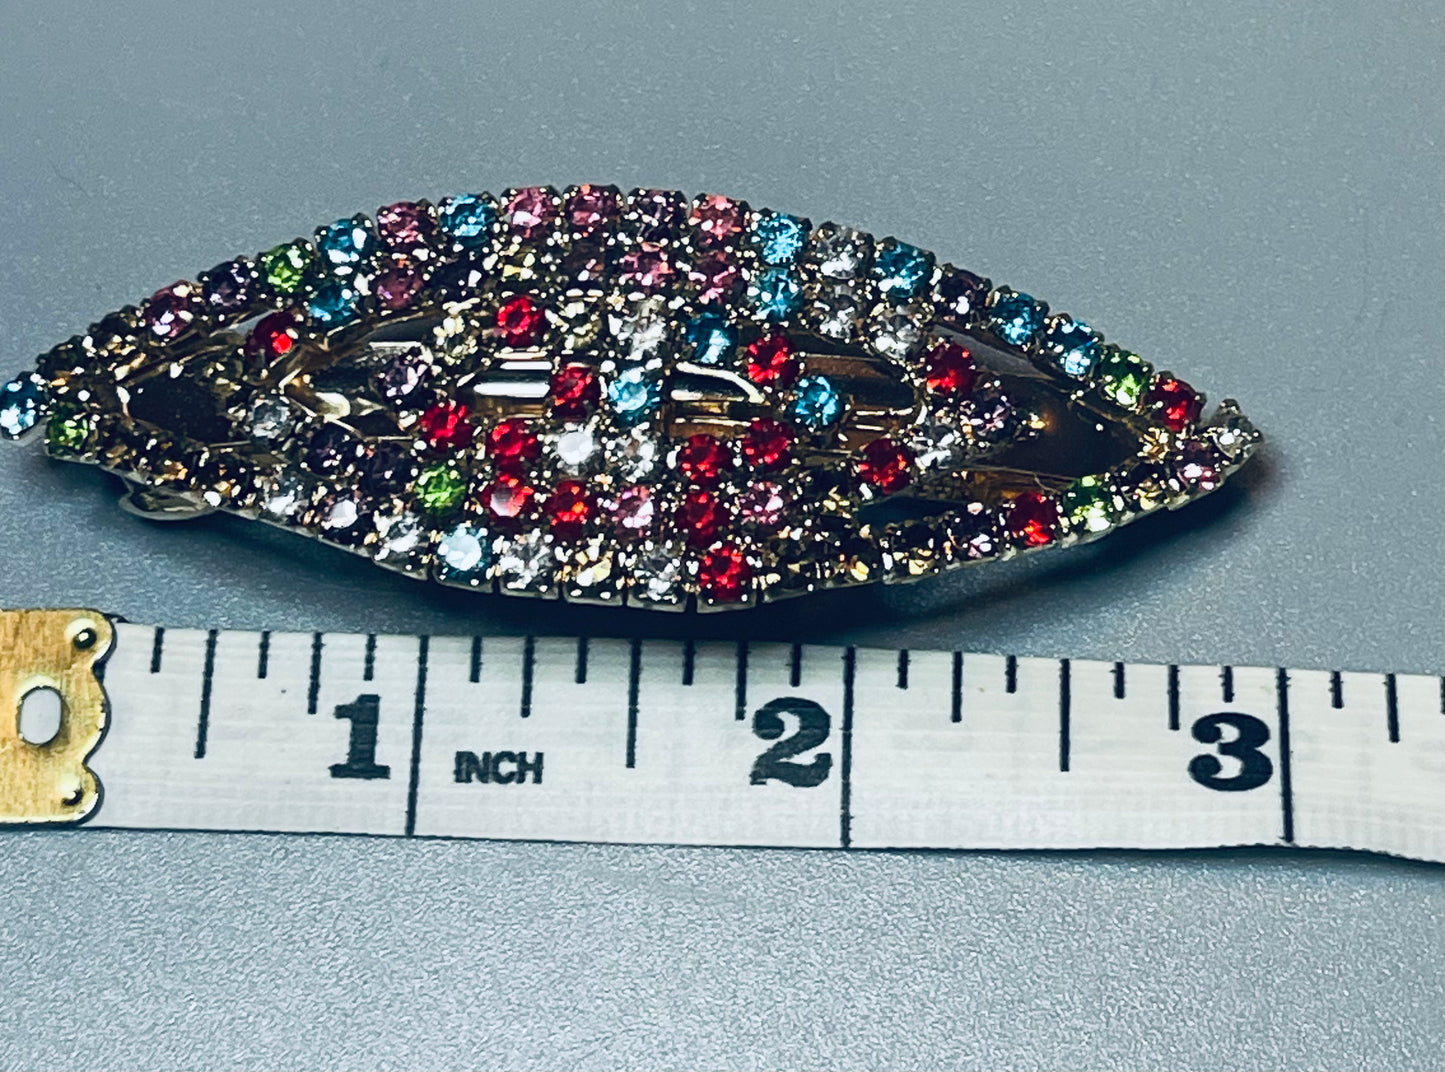 Rainbow Crystal rhinestone barrette approximately 3.0” gold tone formal hair accessories gift wedding bridesmaid Prom birthday gifts